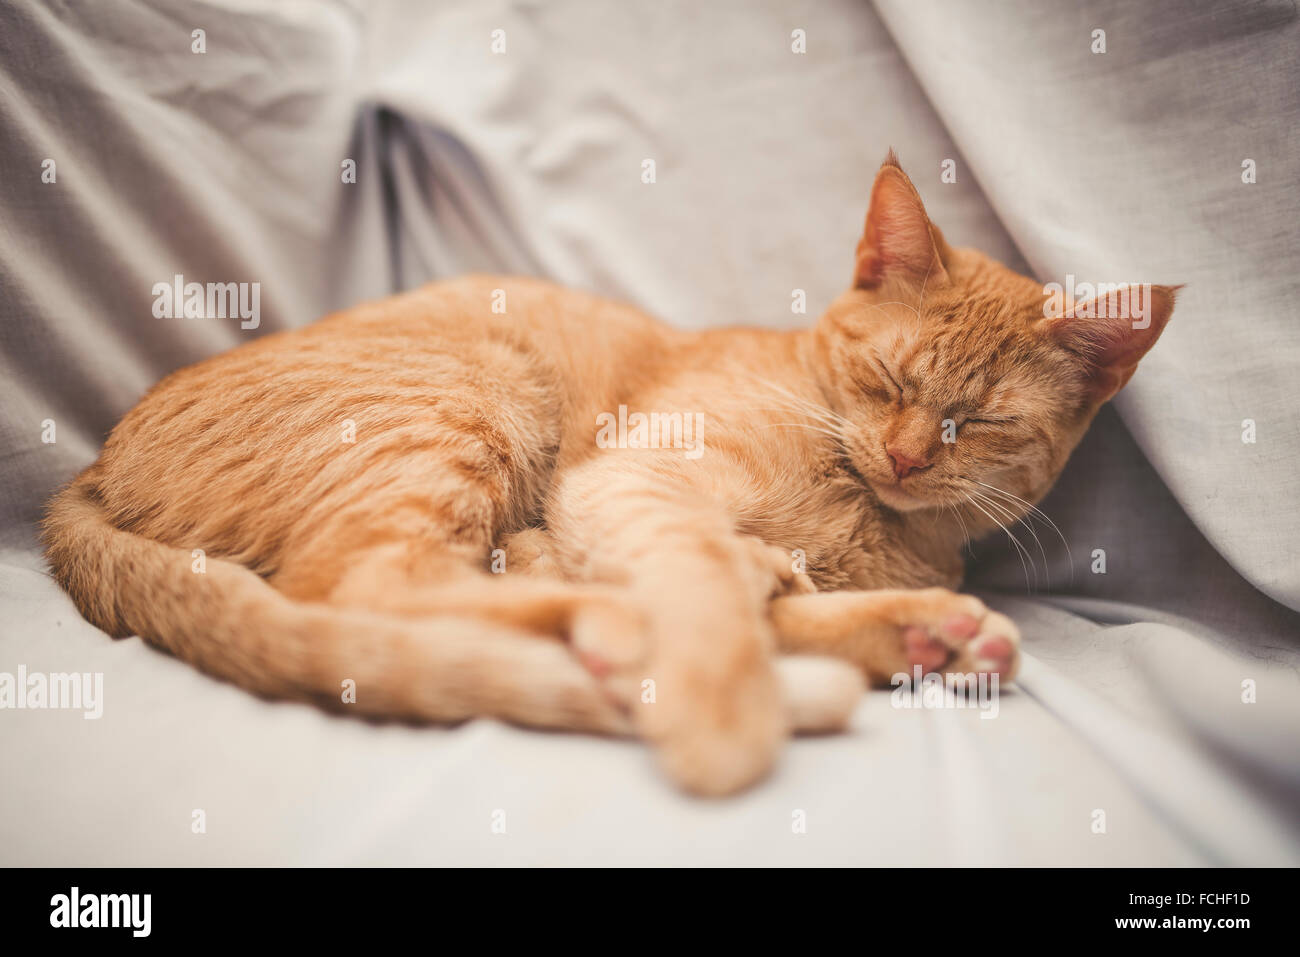 Rad tabby cat sleeping on a blanket at home Stock Photo